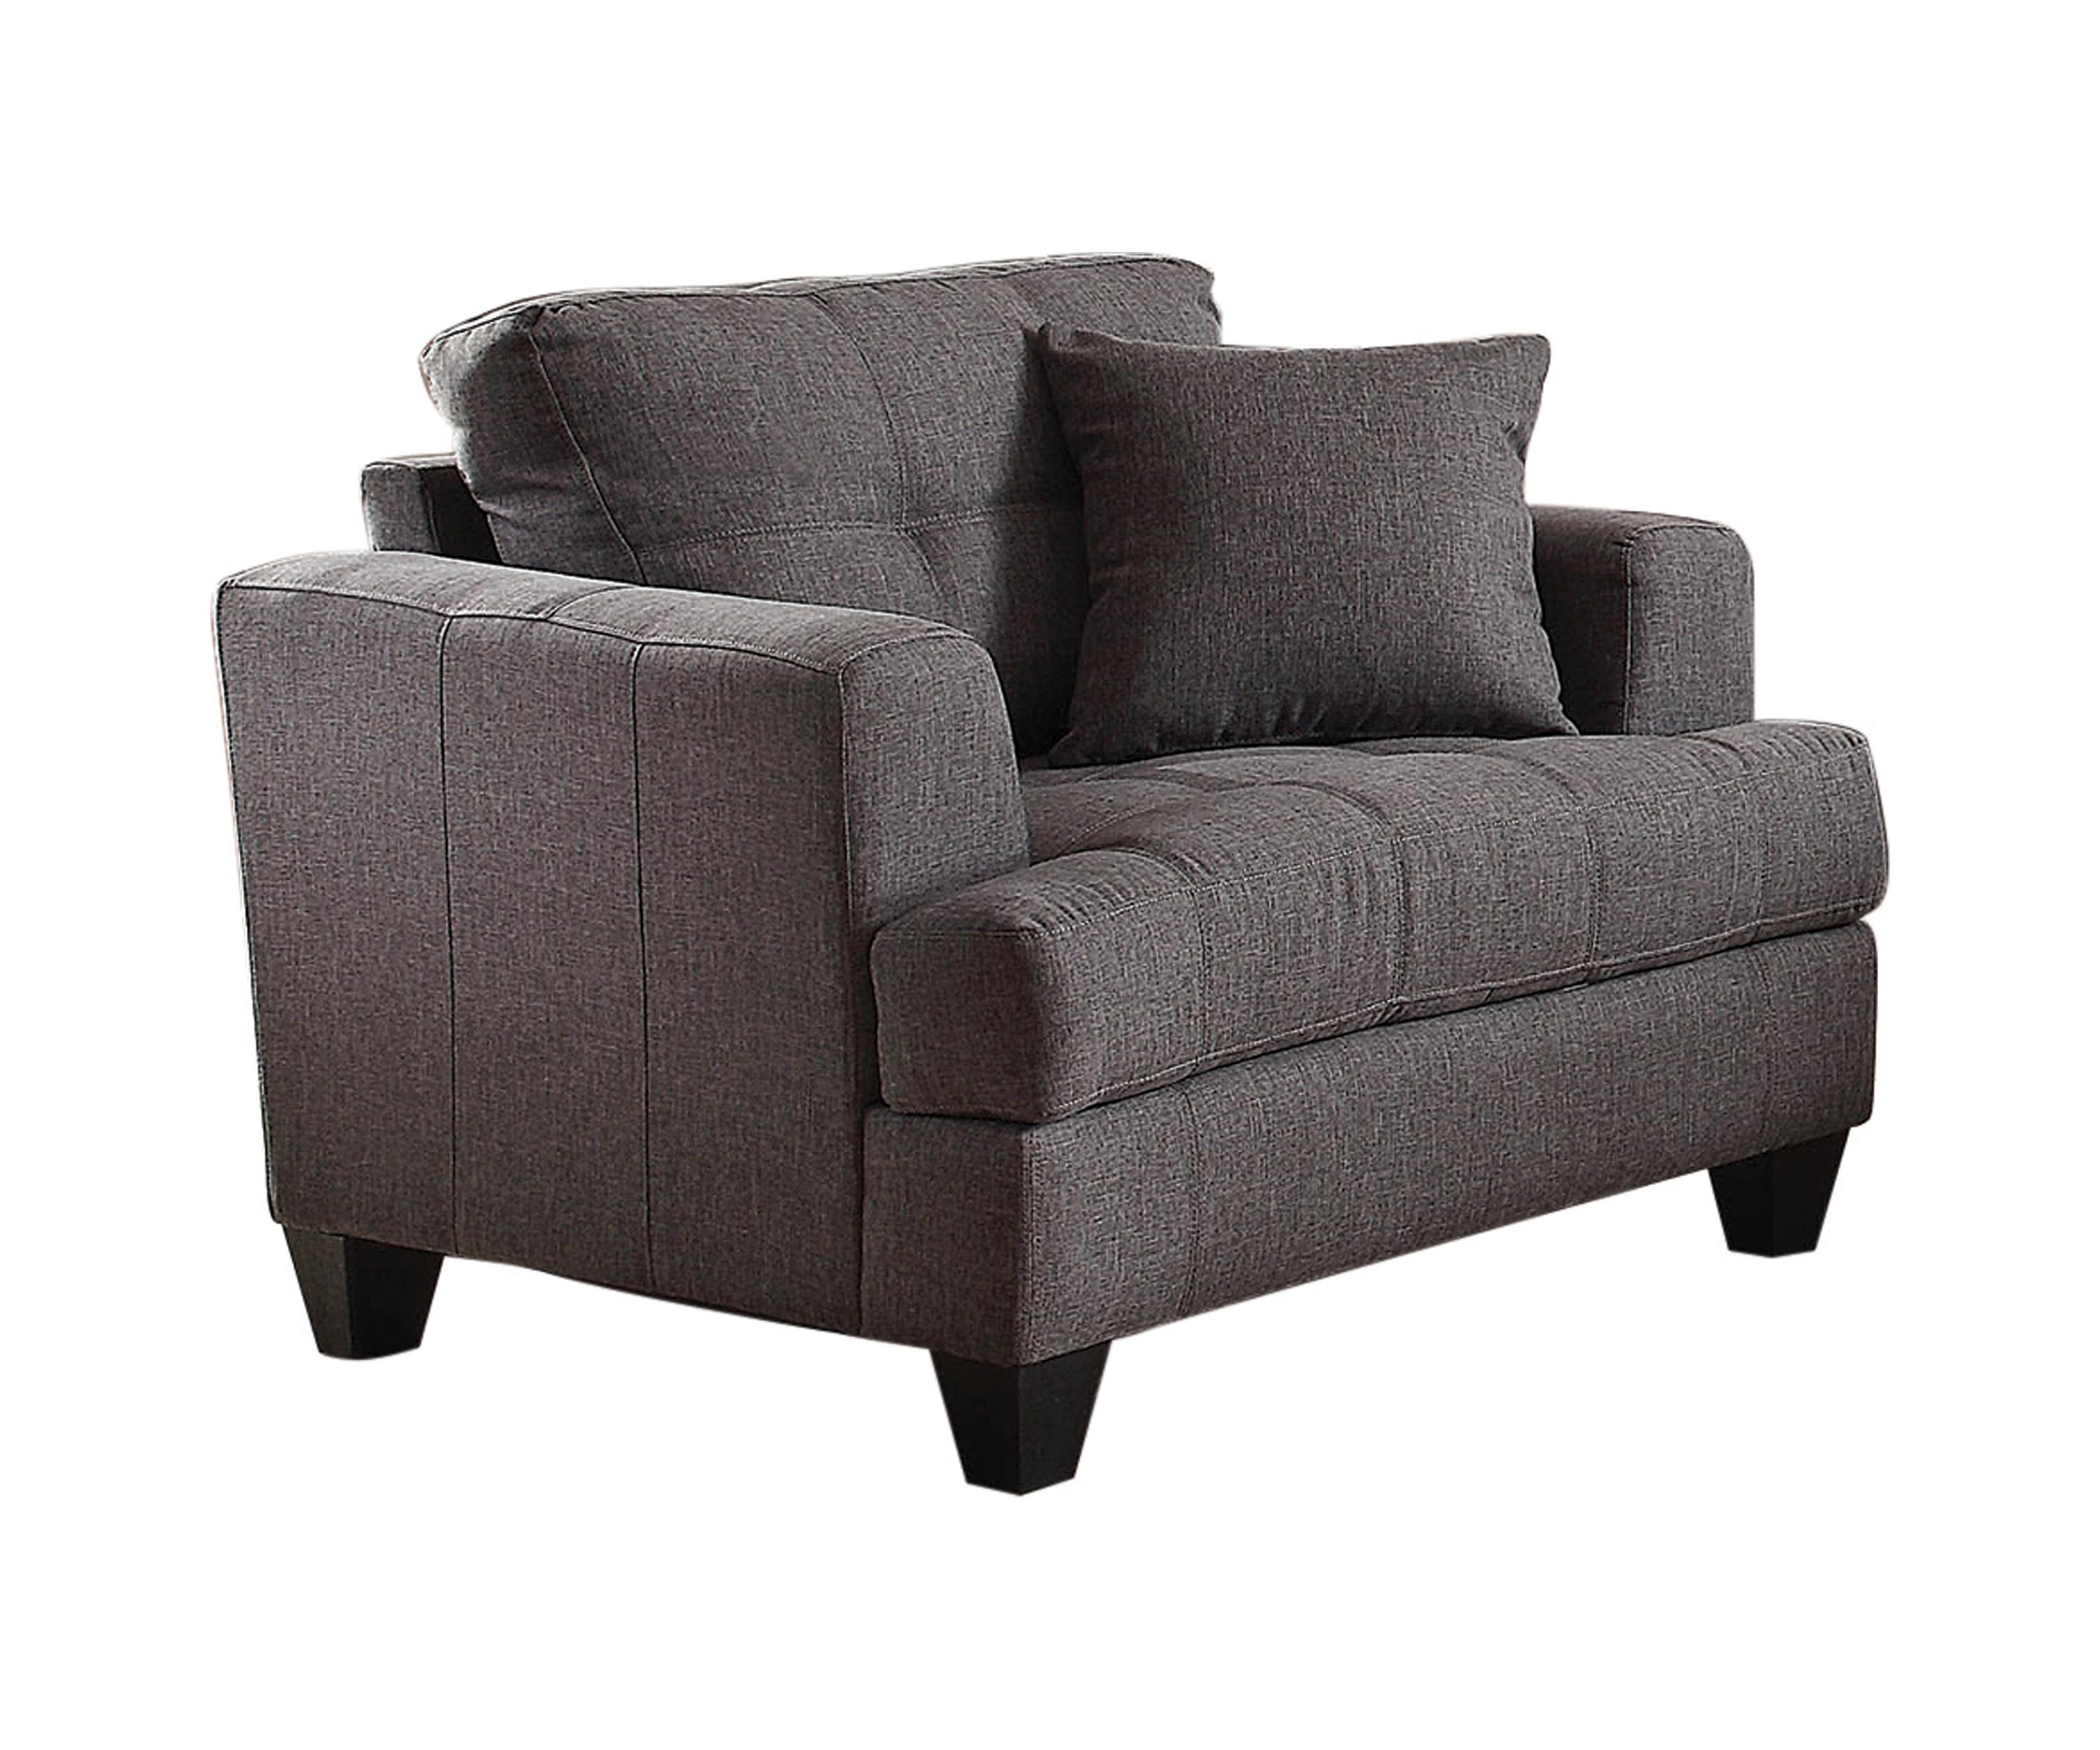 Transitional Arm Chair 505177 Samuel 505177 in Charcoal 